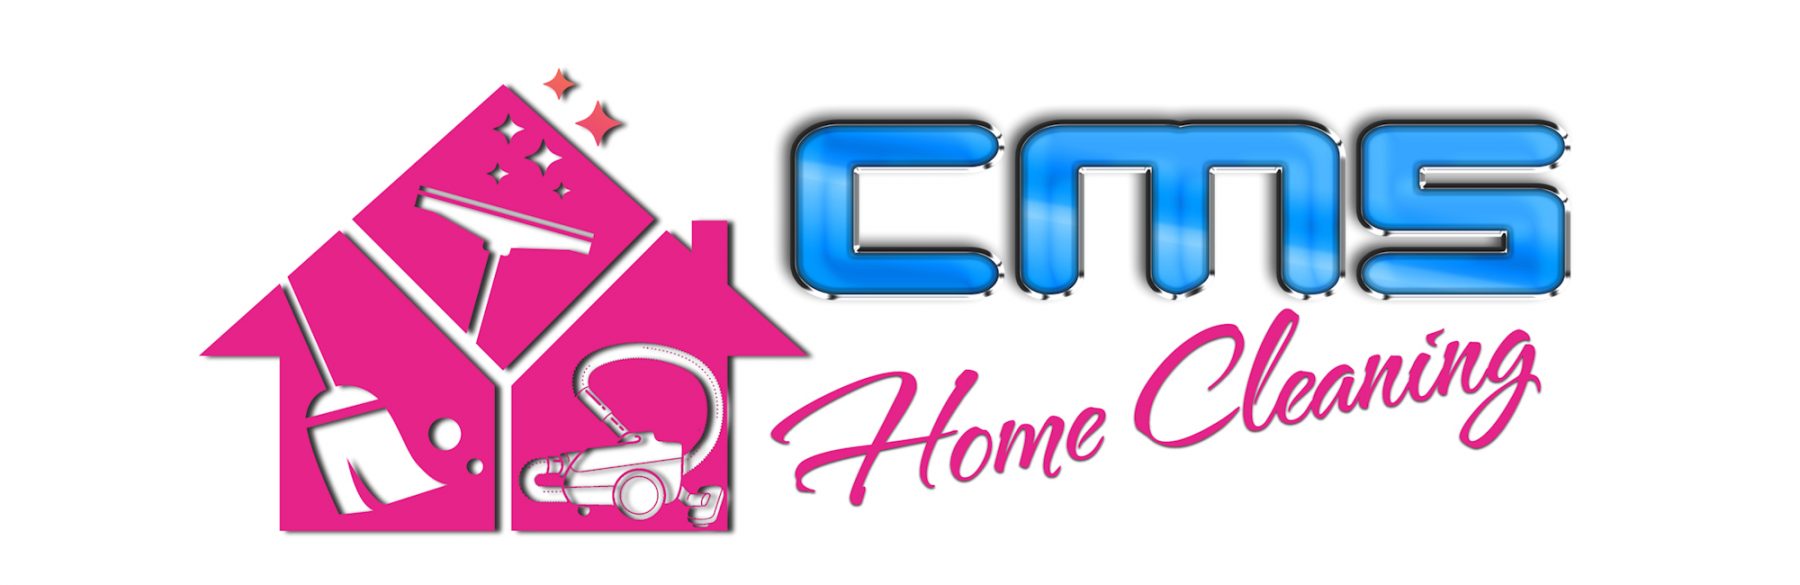 CMS launch Home Cleaning Service